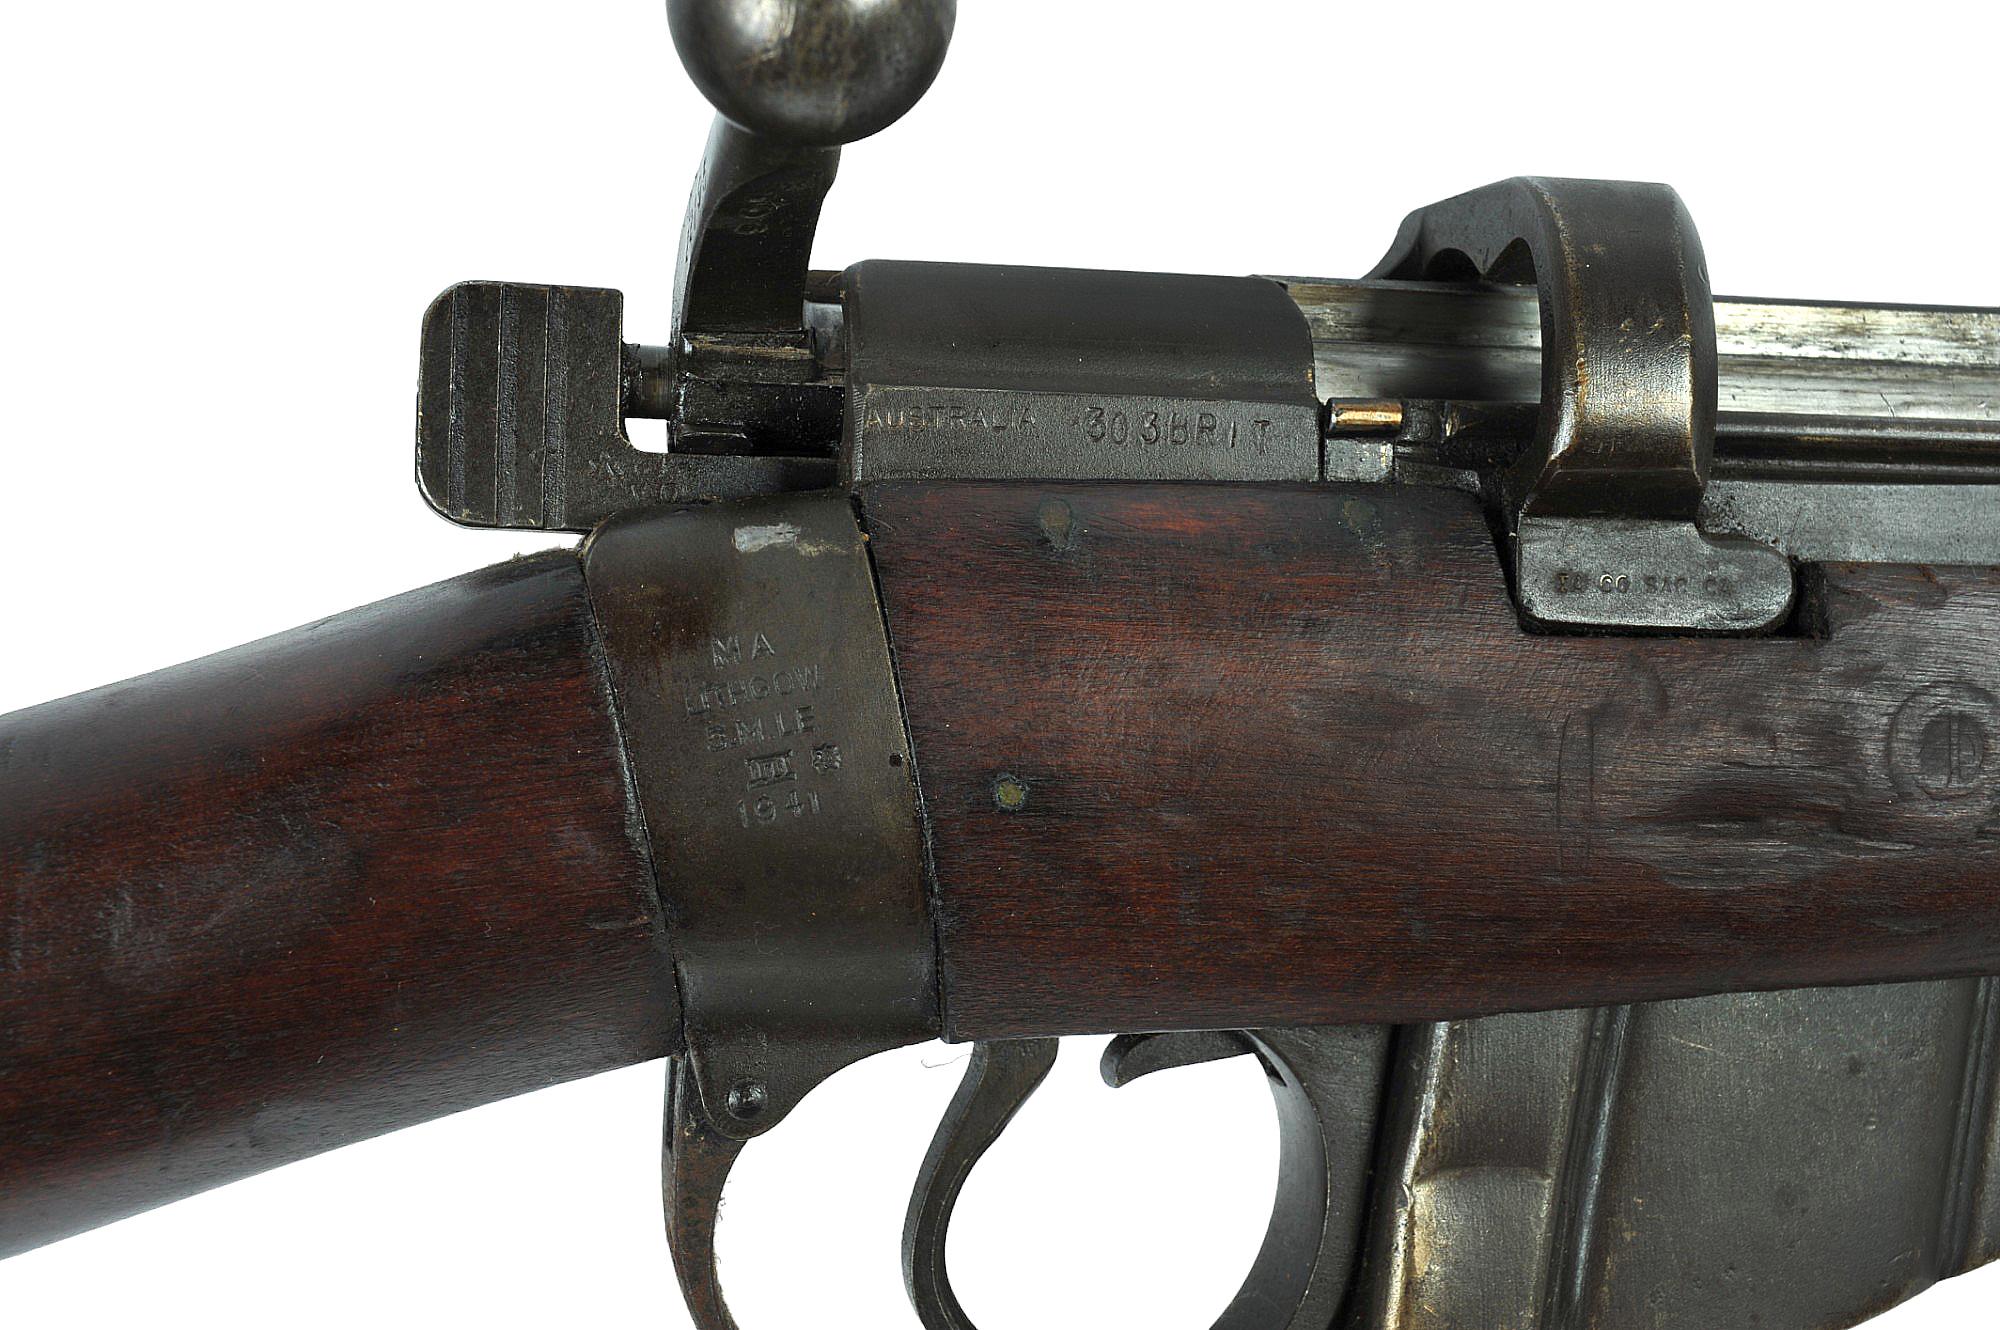 Australian Military WWII issue No.1 III* .303 Lee-Enfield Bolt-Action Rifle - FFL # G22195 (JRW1)